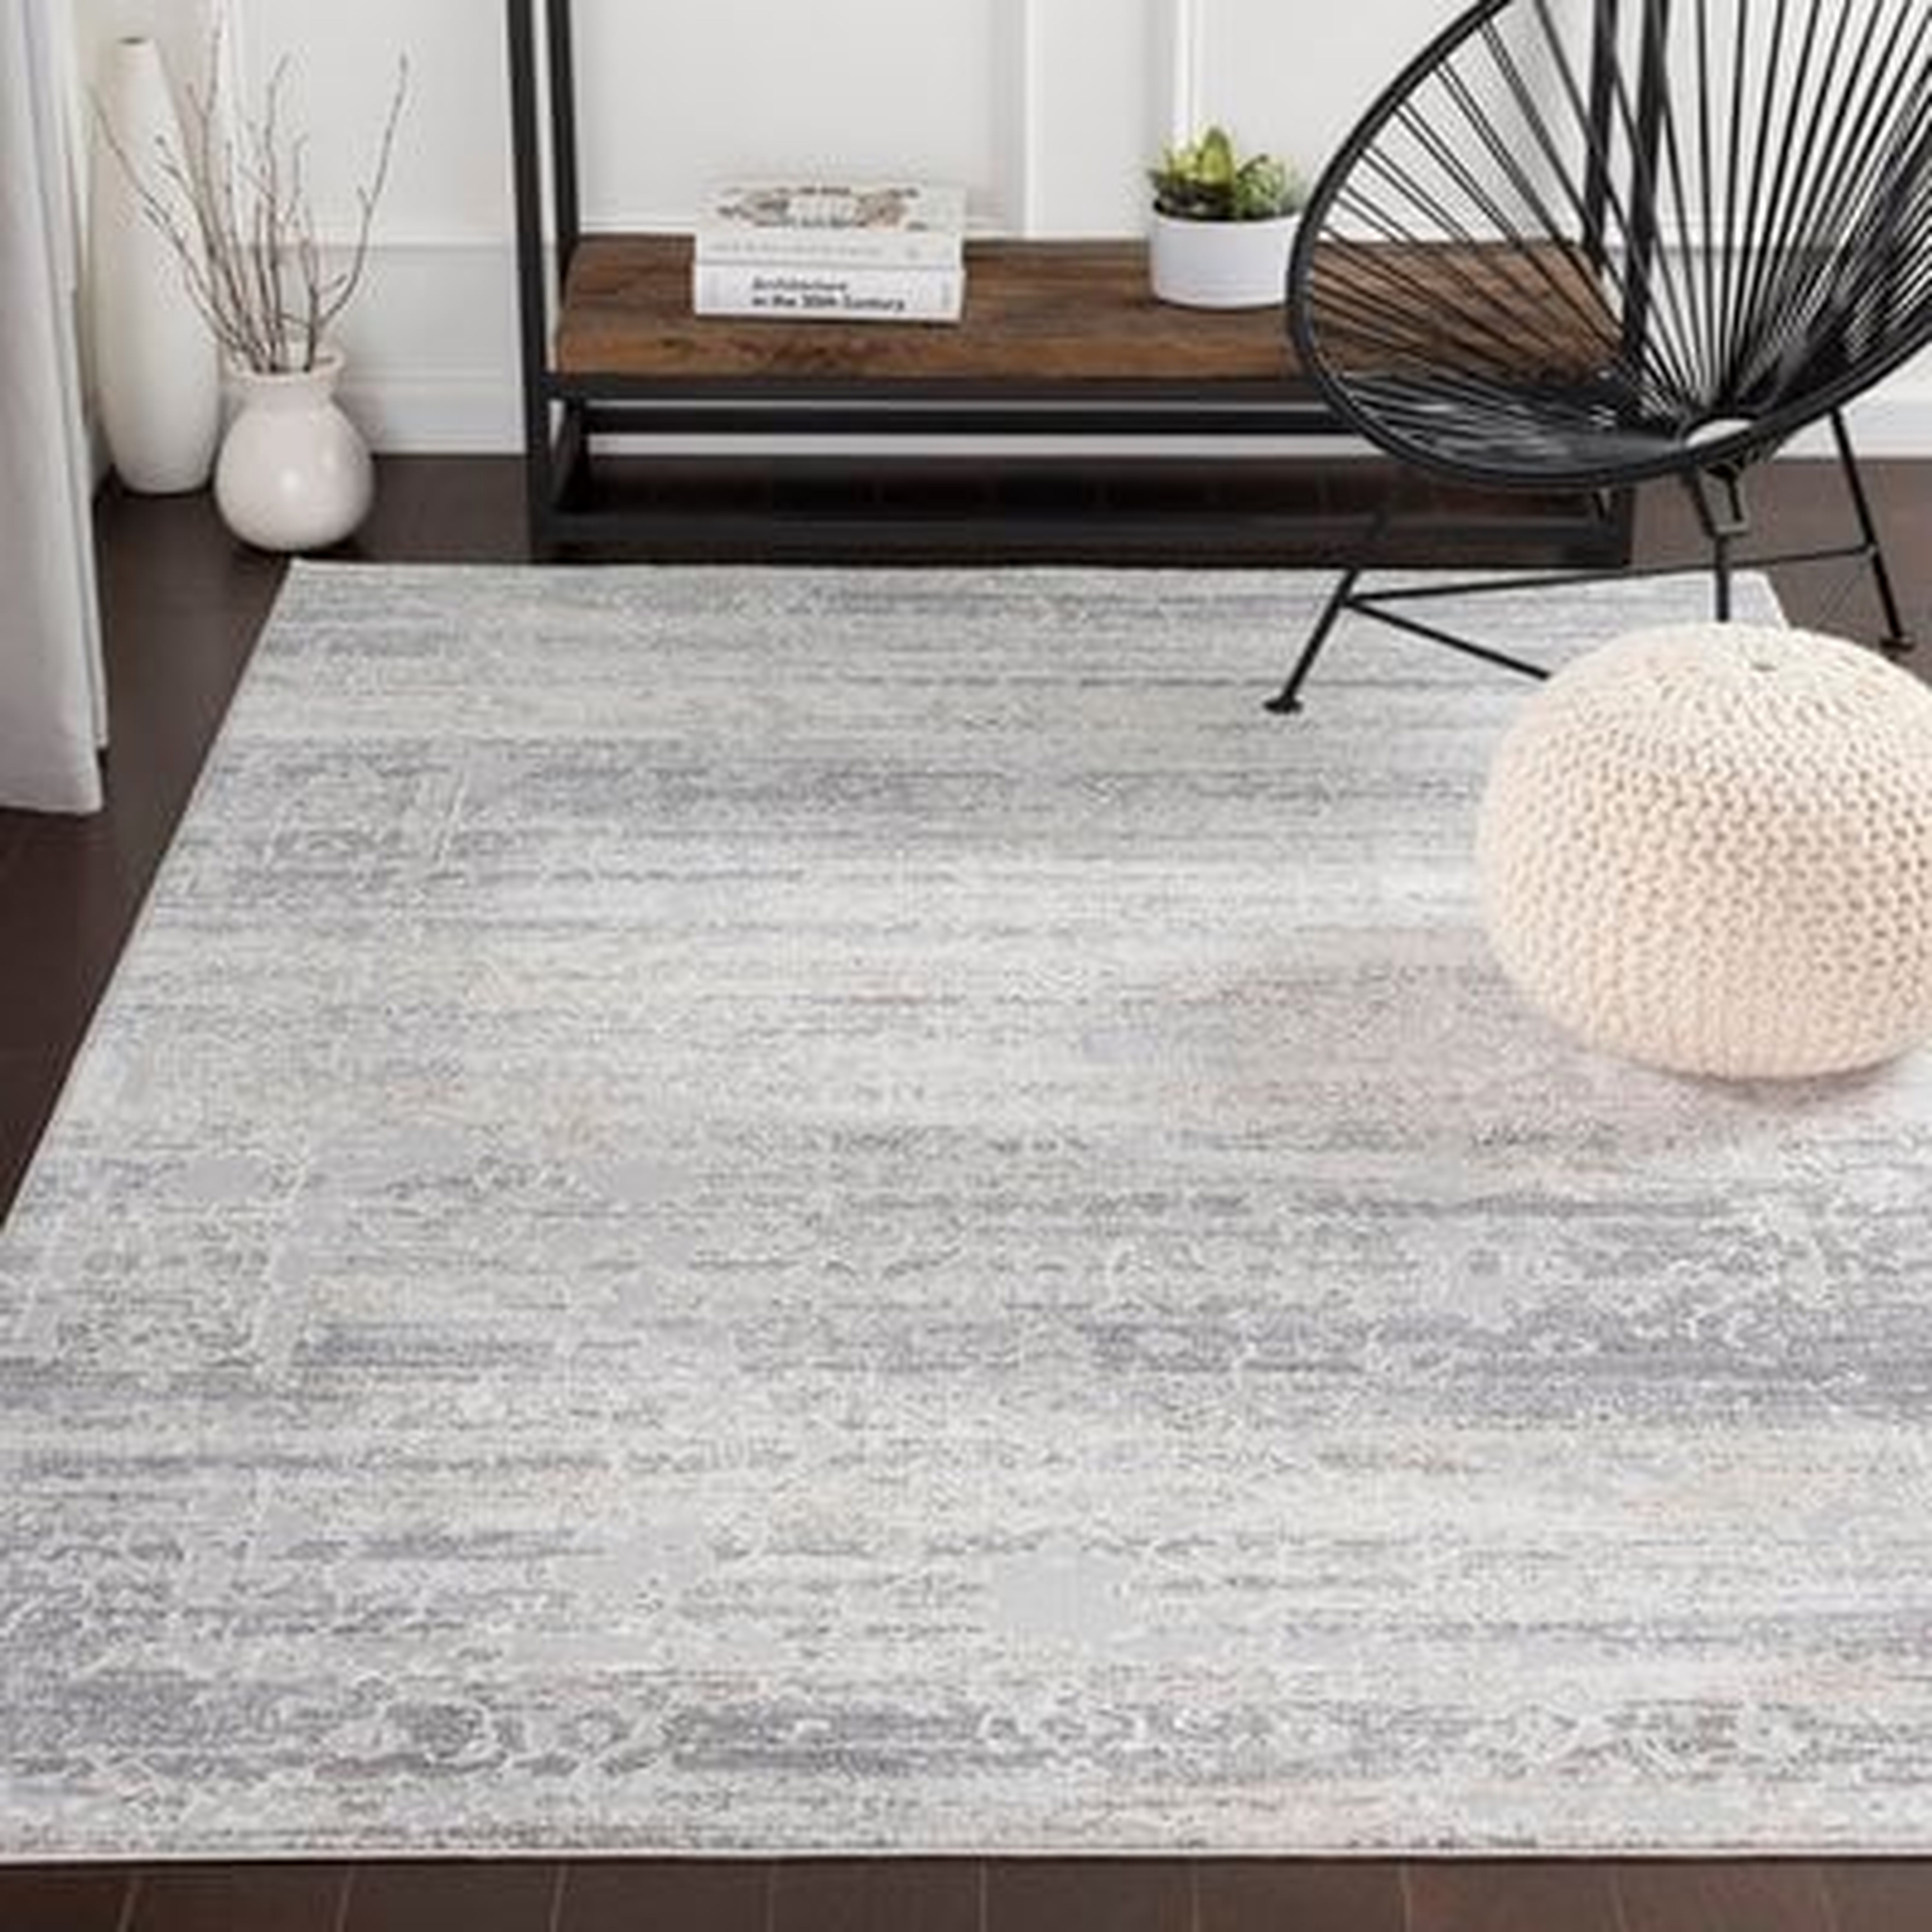 Heger Distressed Silver Gray/White Area Rug - Wayfair